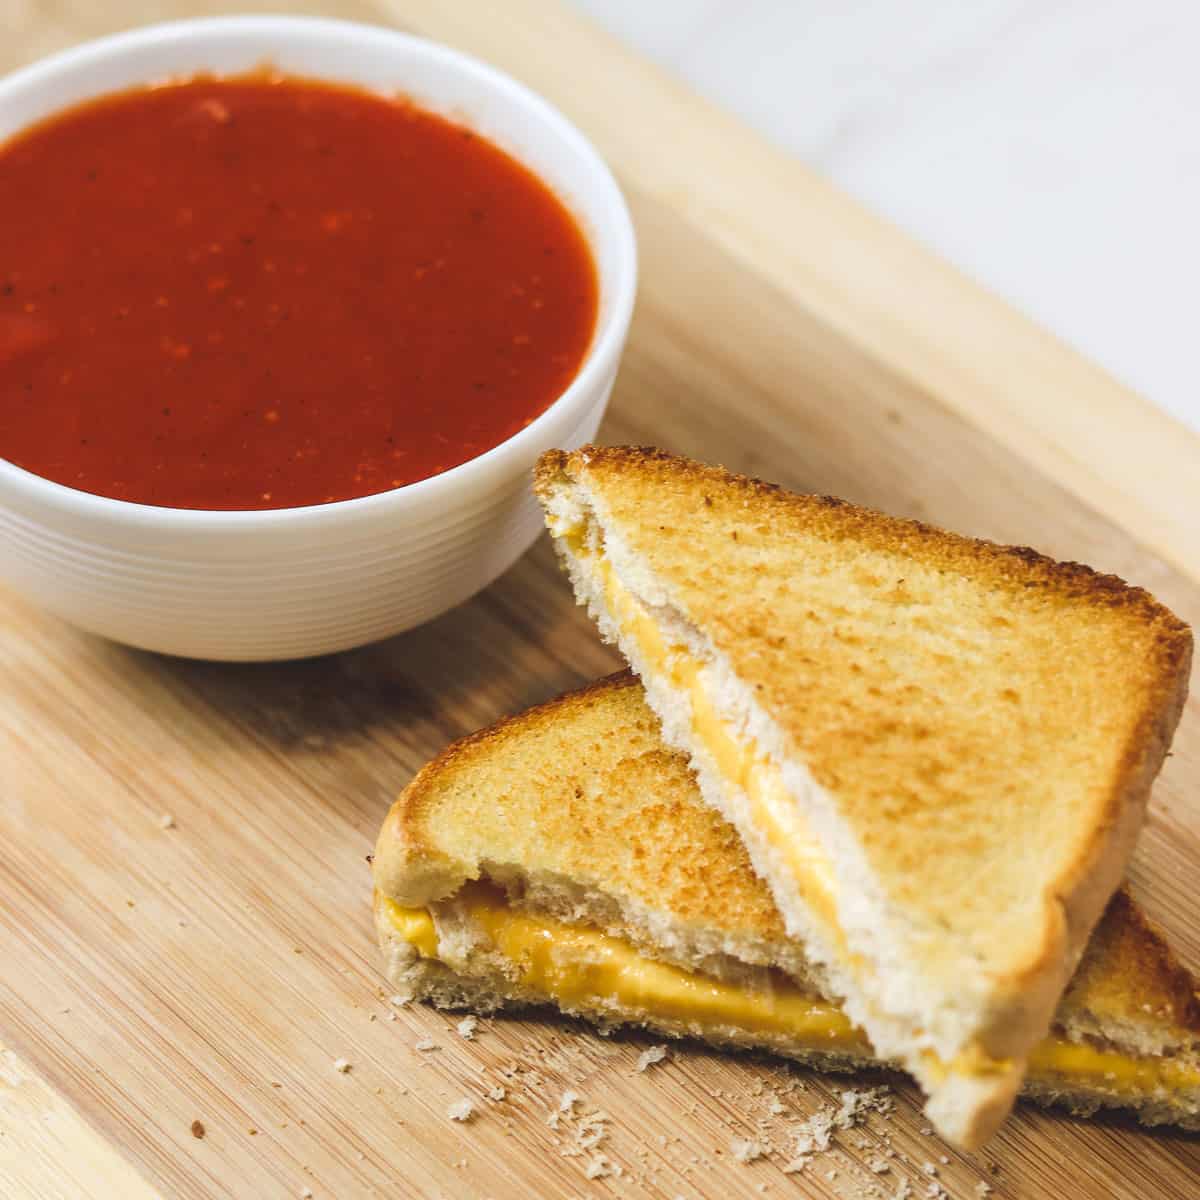 https://skinnycomfort.com/wp-content/uploads/2020/03/Air-Fryer-Grilled-Cheese-4.jpg